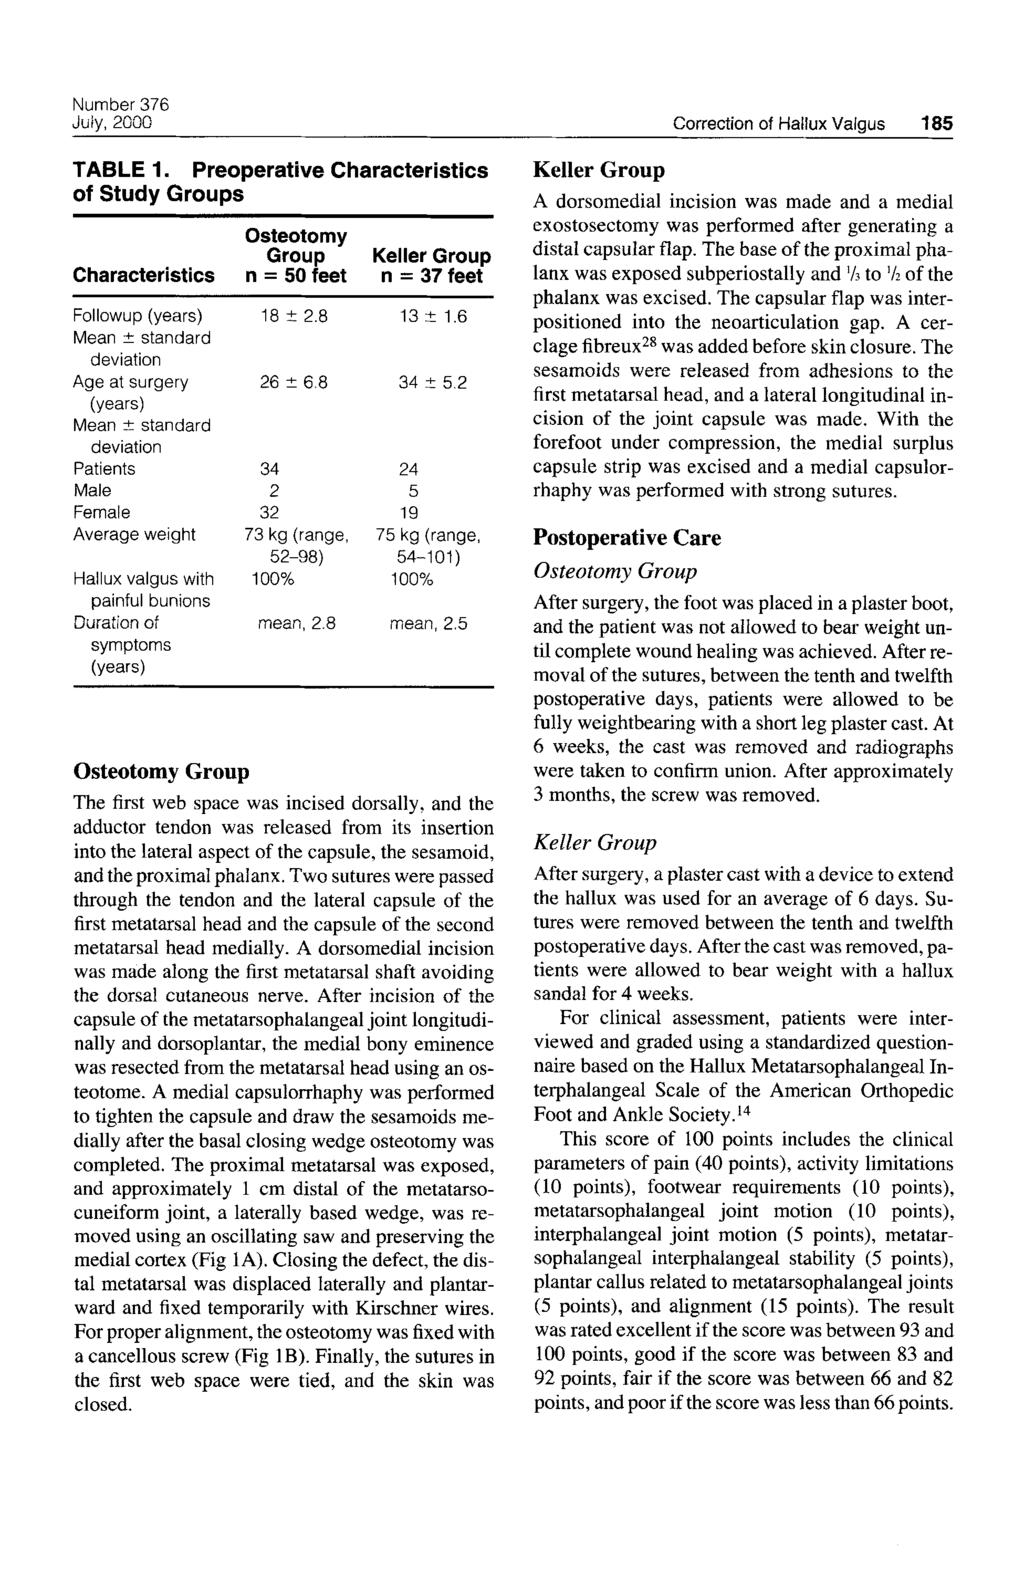 Number 376 July, 2000 Correction of Hallux Valaus 185 TABLE 1. Preoperative Characteristics of Study Groups Osteotomy Characteristics Group n = 50 feet Keller Group n = 37 feet Followup (years) Mean?